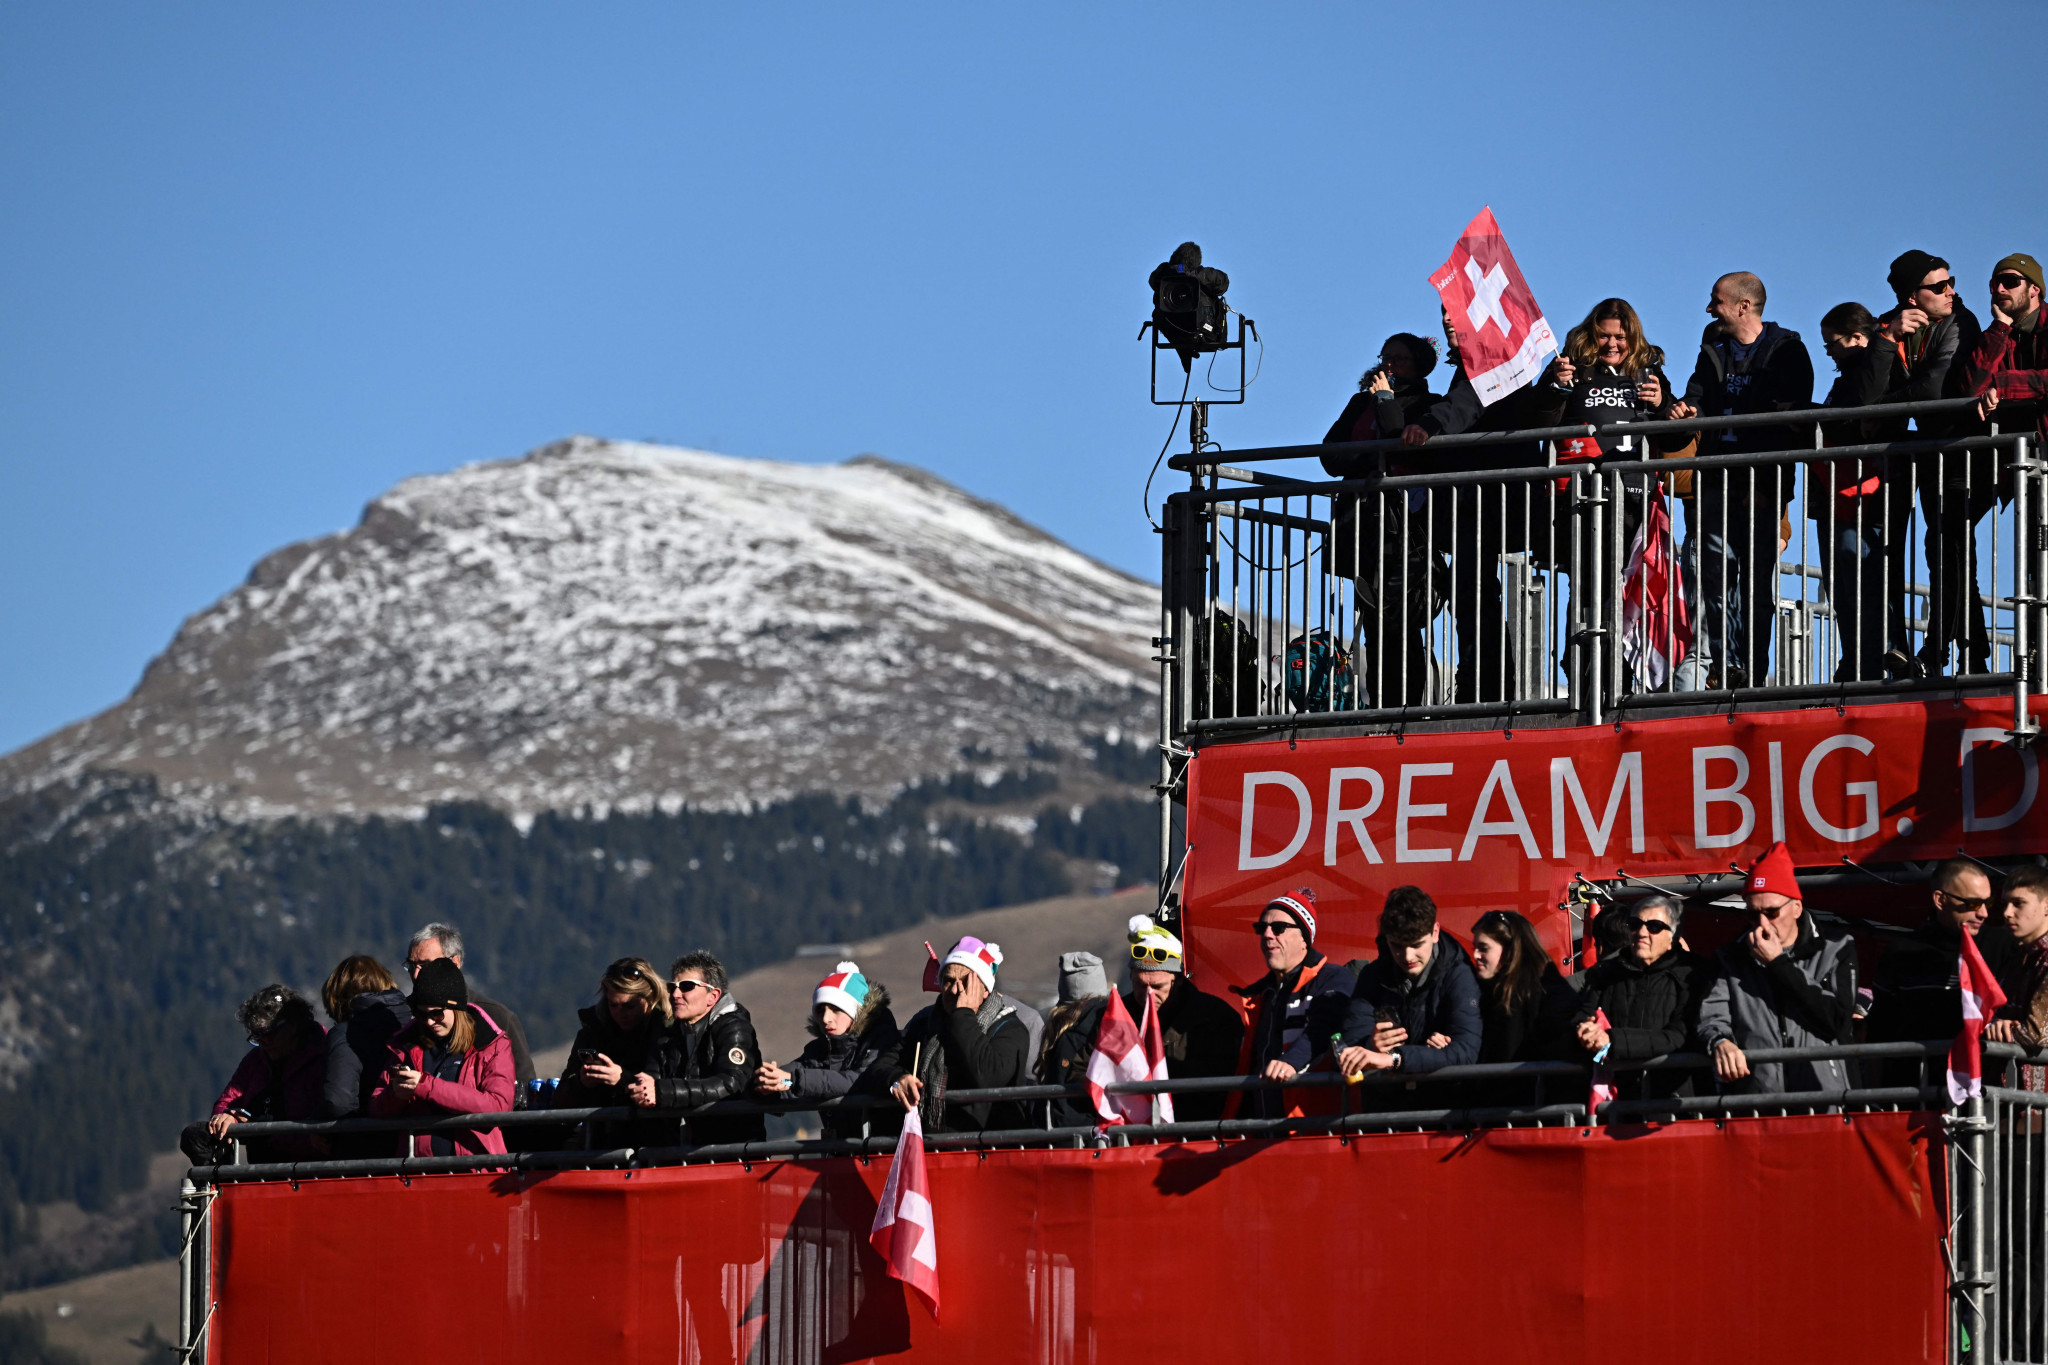 Swiss Olympic wants to host the Winter Olympics and Paralympics across the country ©Getty Images